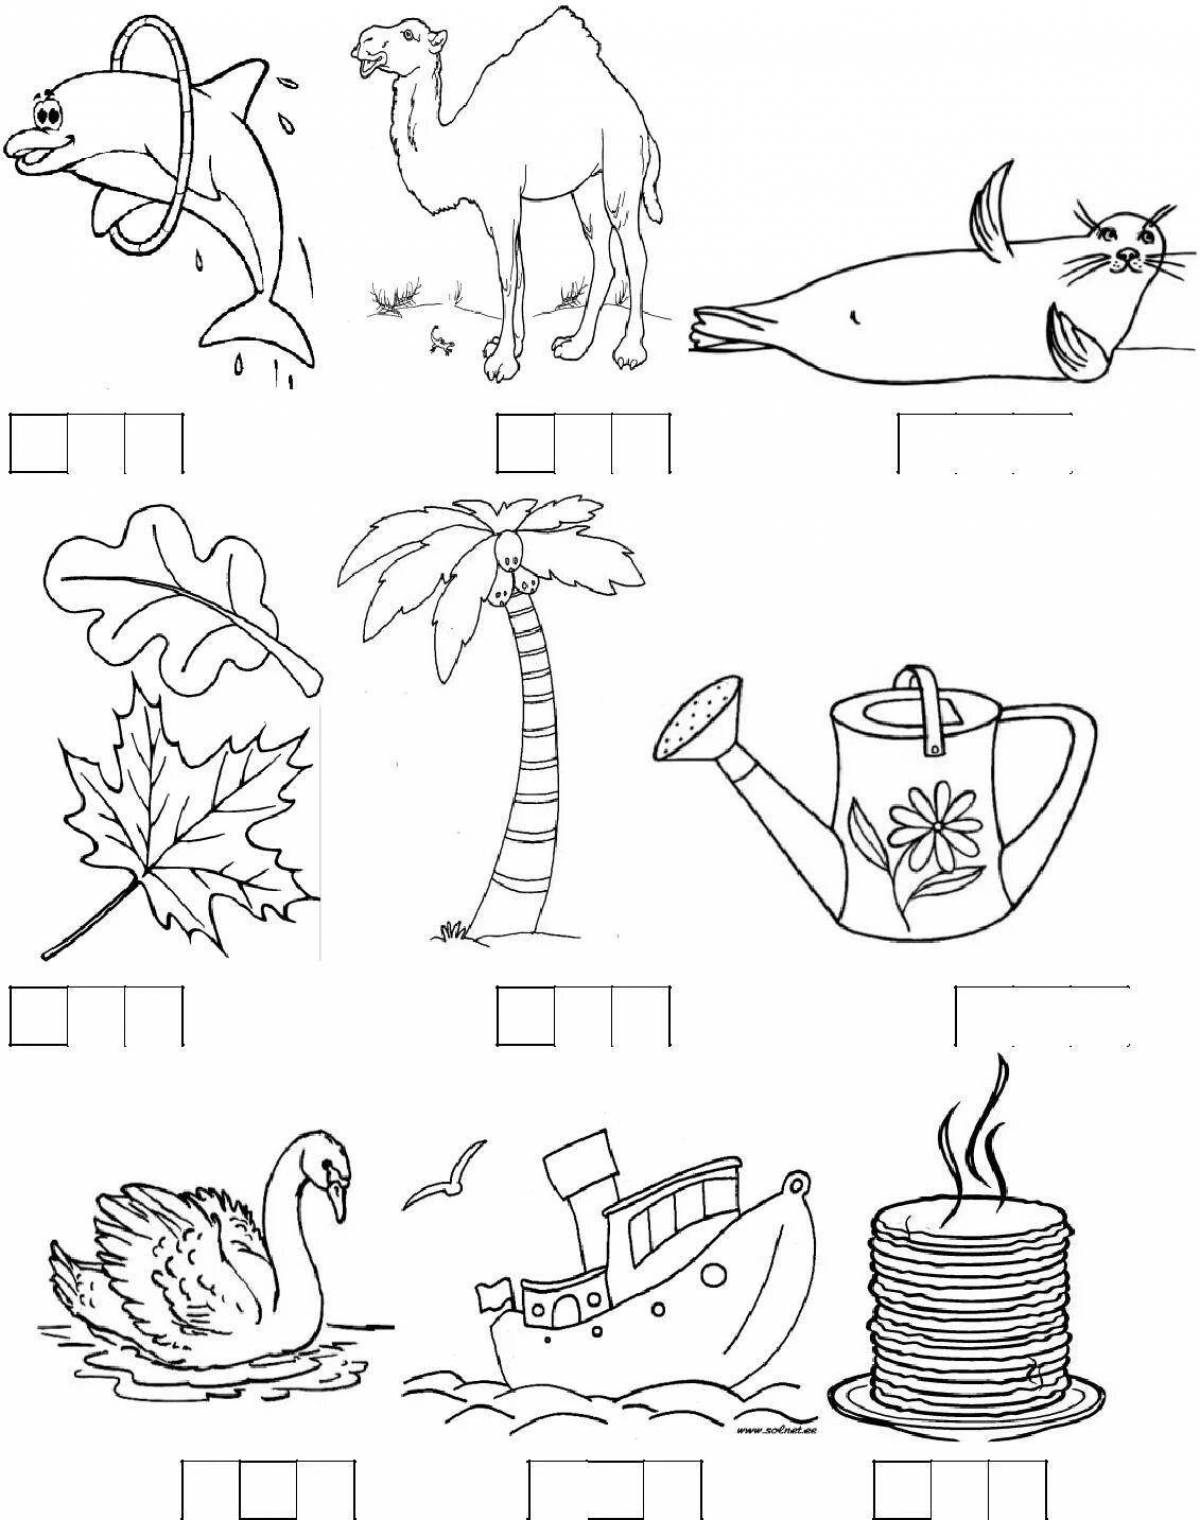 Literacy coloring pages